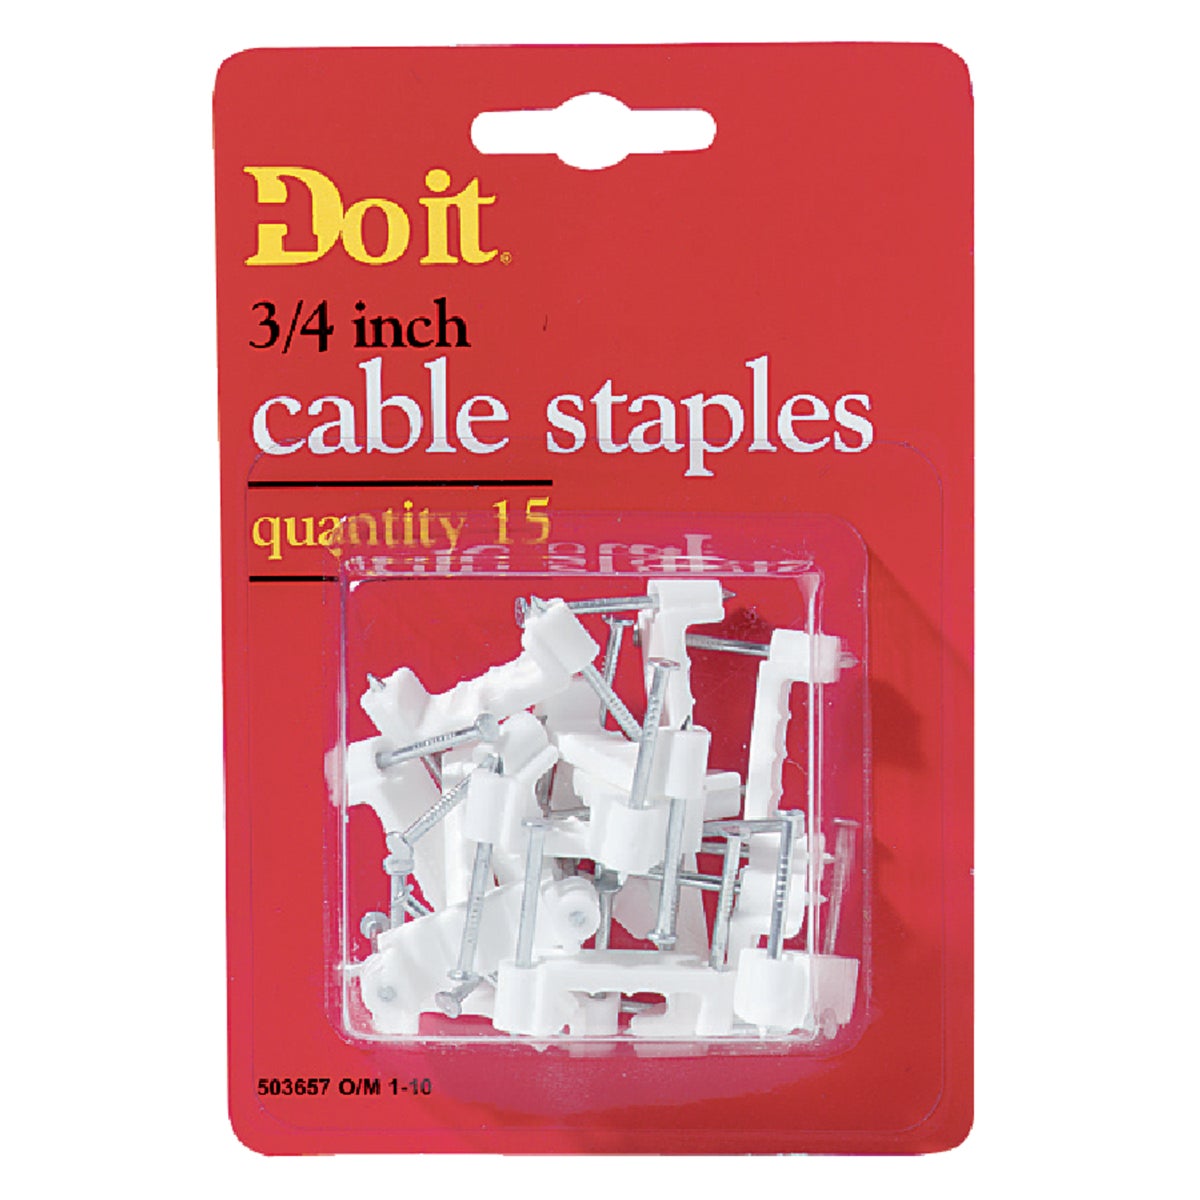 SIM Supply, Inc. 503657 Do it 3/4 In. Plastic Cable Staple (15-Pack) 503657